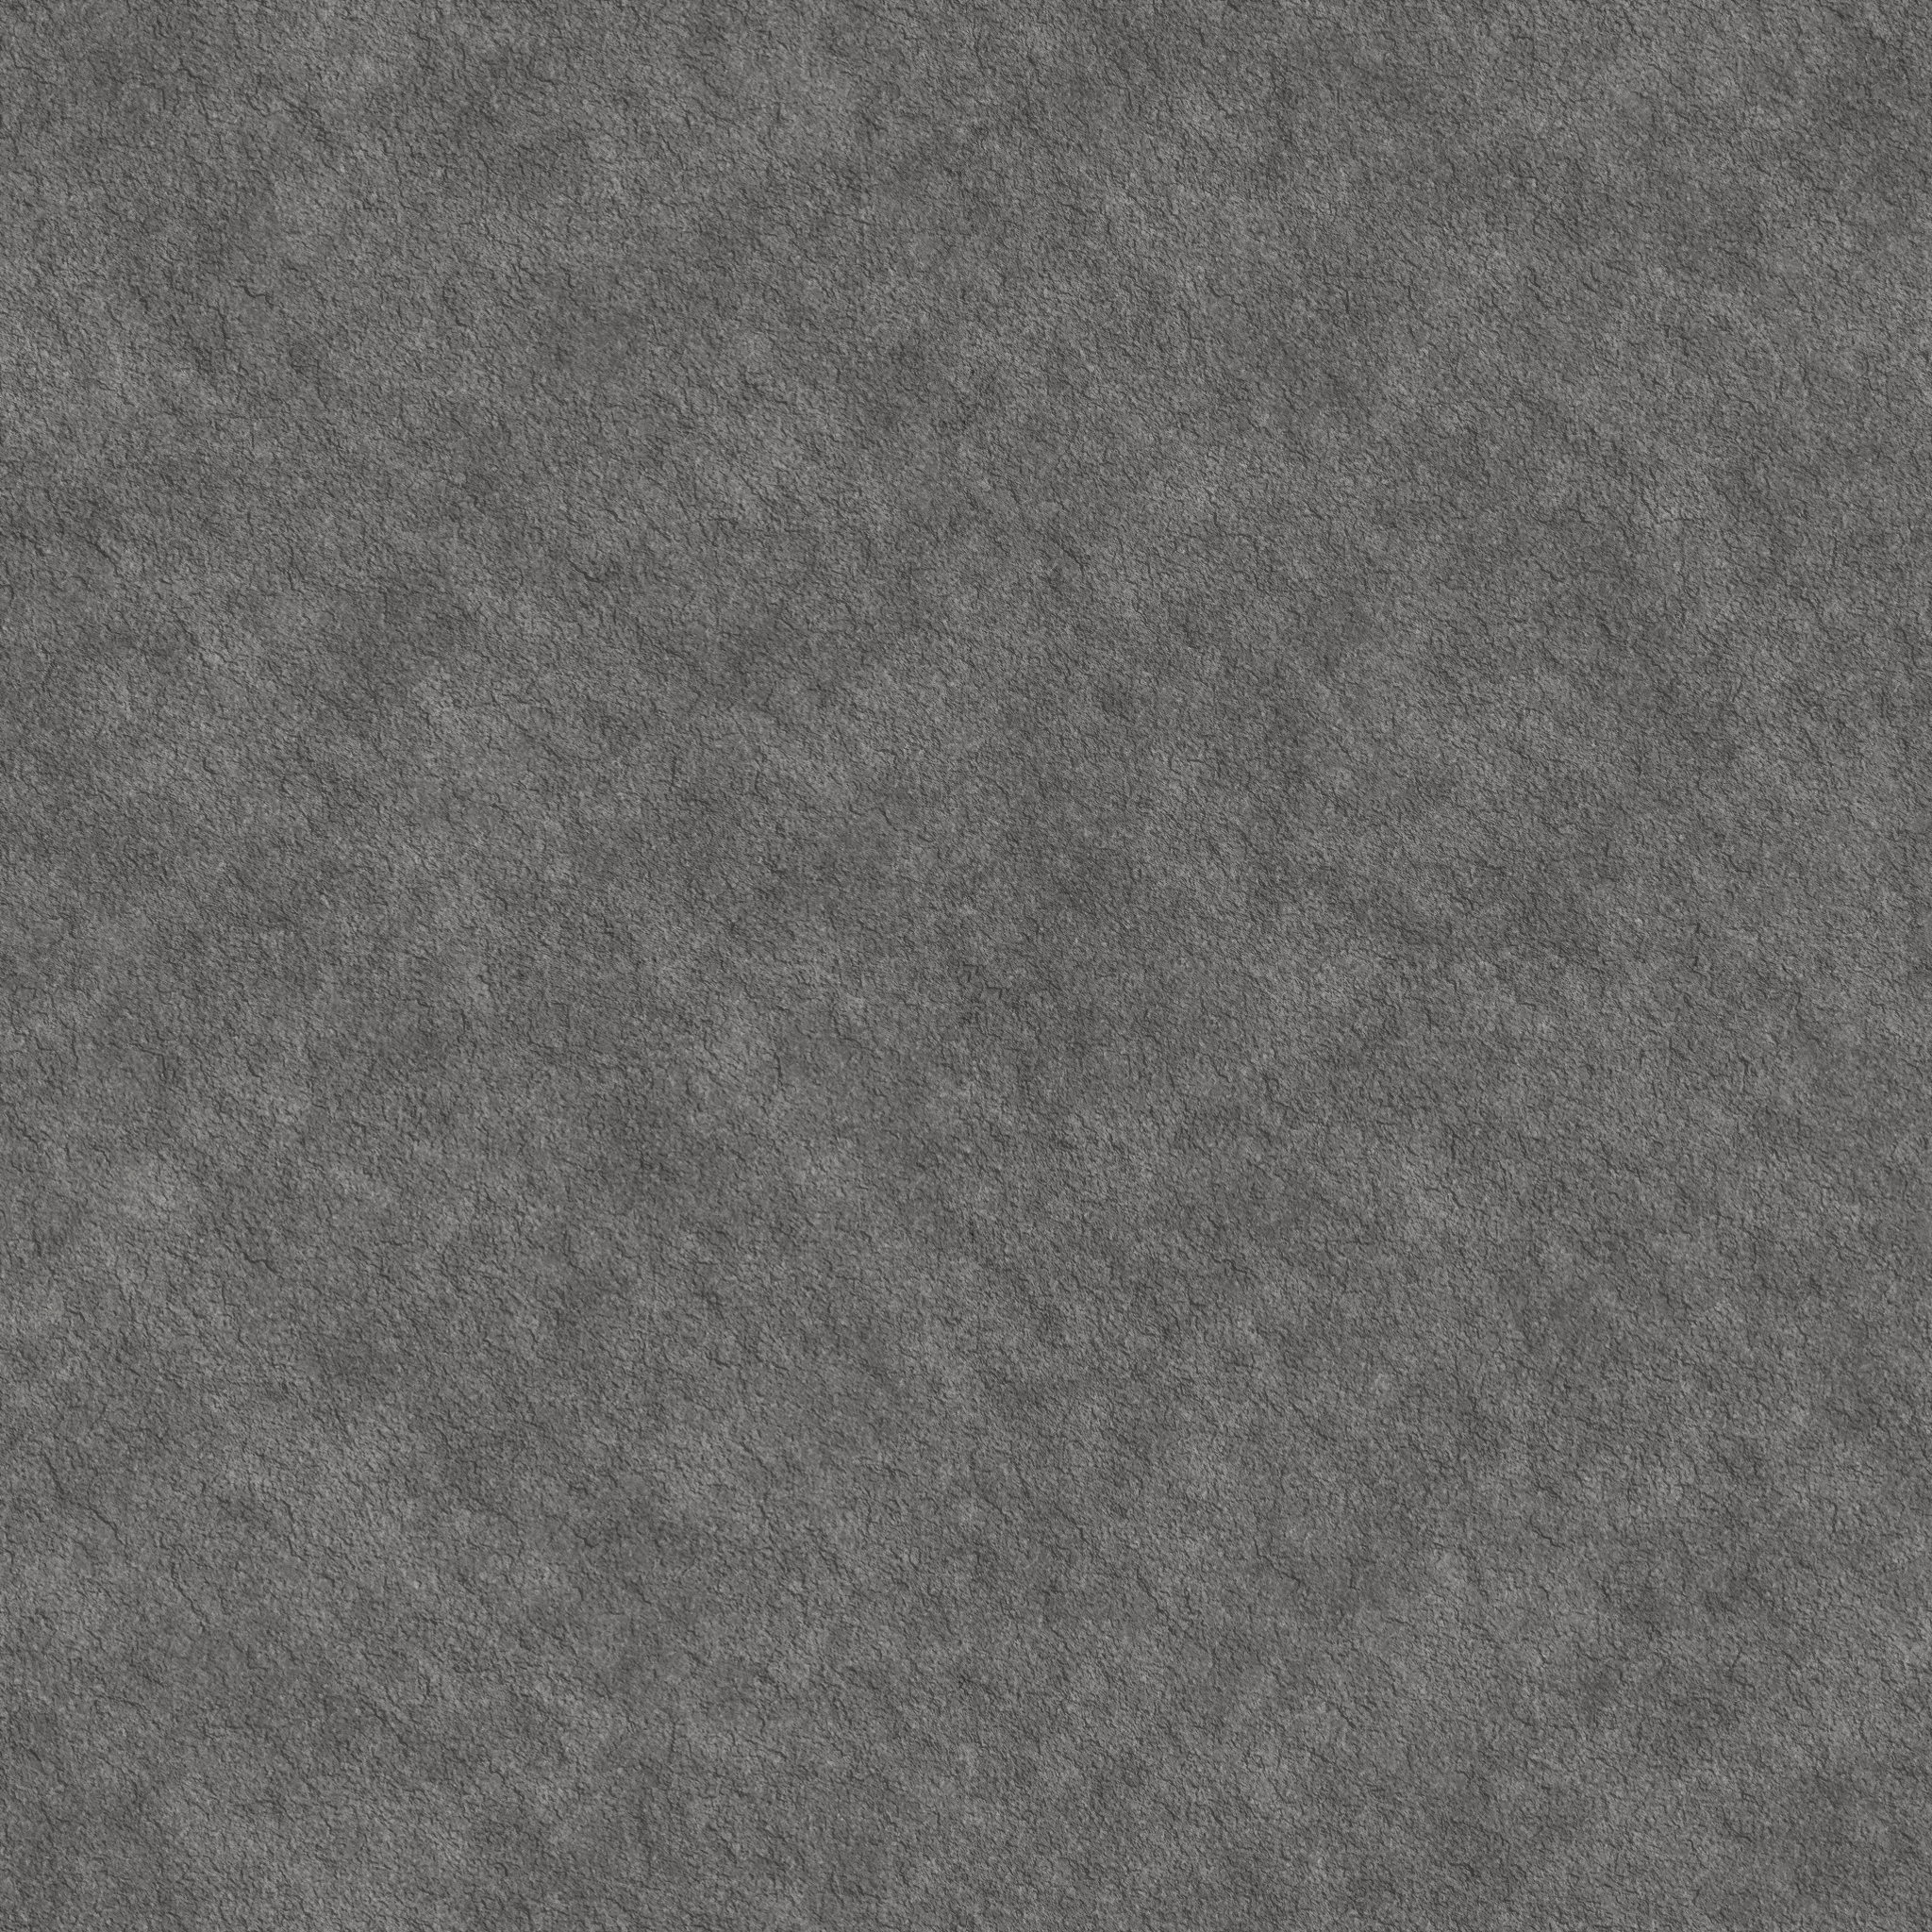 Road/Dark Stone Texture [Tileable | 2048x2048] by FabooGuy on DeviantArt